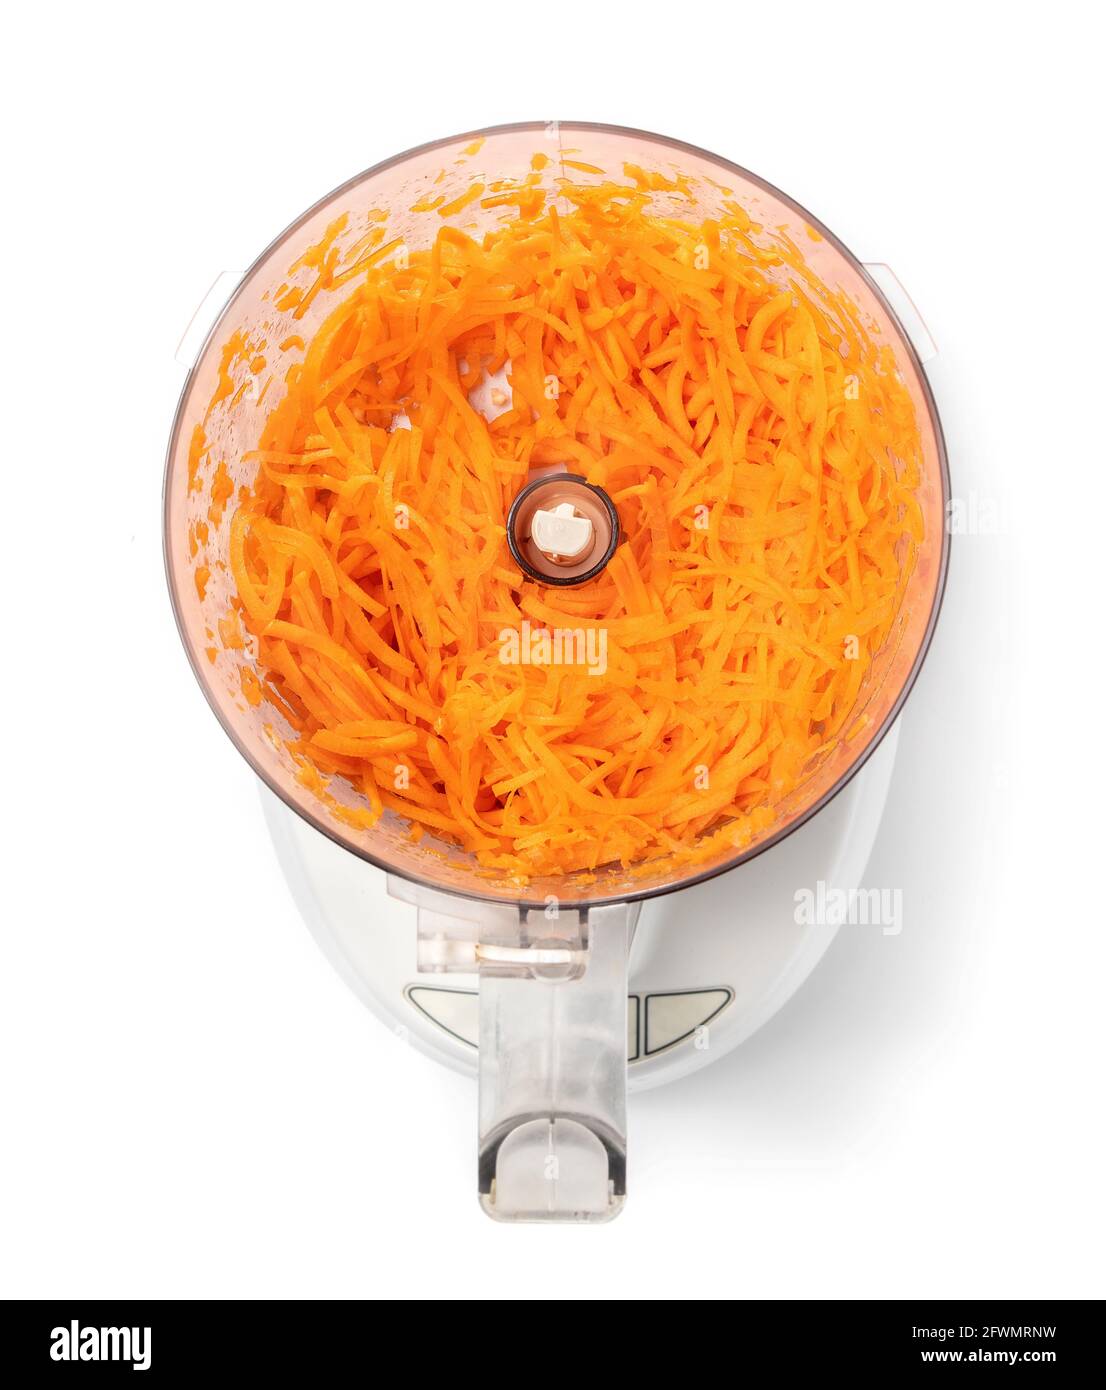 https://c8.alamy.com/comp/2FWMRNW/carrots-shredded-in-food-processor-top-view-kitchen-gadget-to-process-large-amount-of-food-in-uniform-sizes-concept-for-healthy-meal-prep-and-make-2FWMRNW.jpg